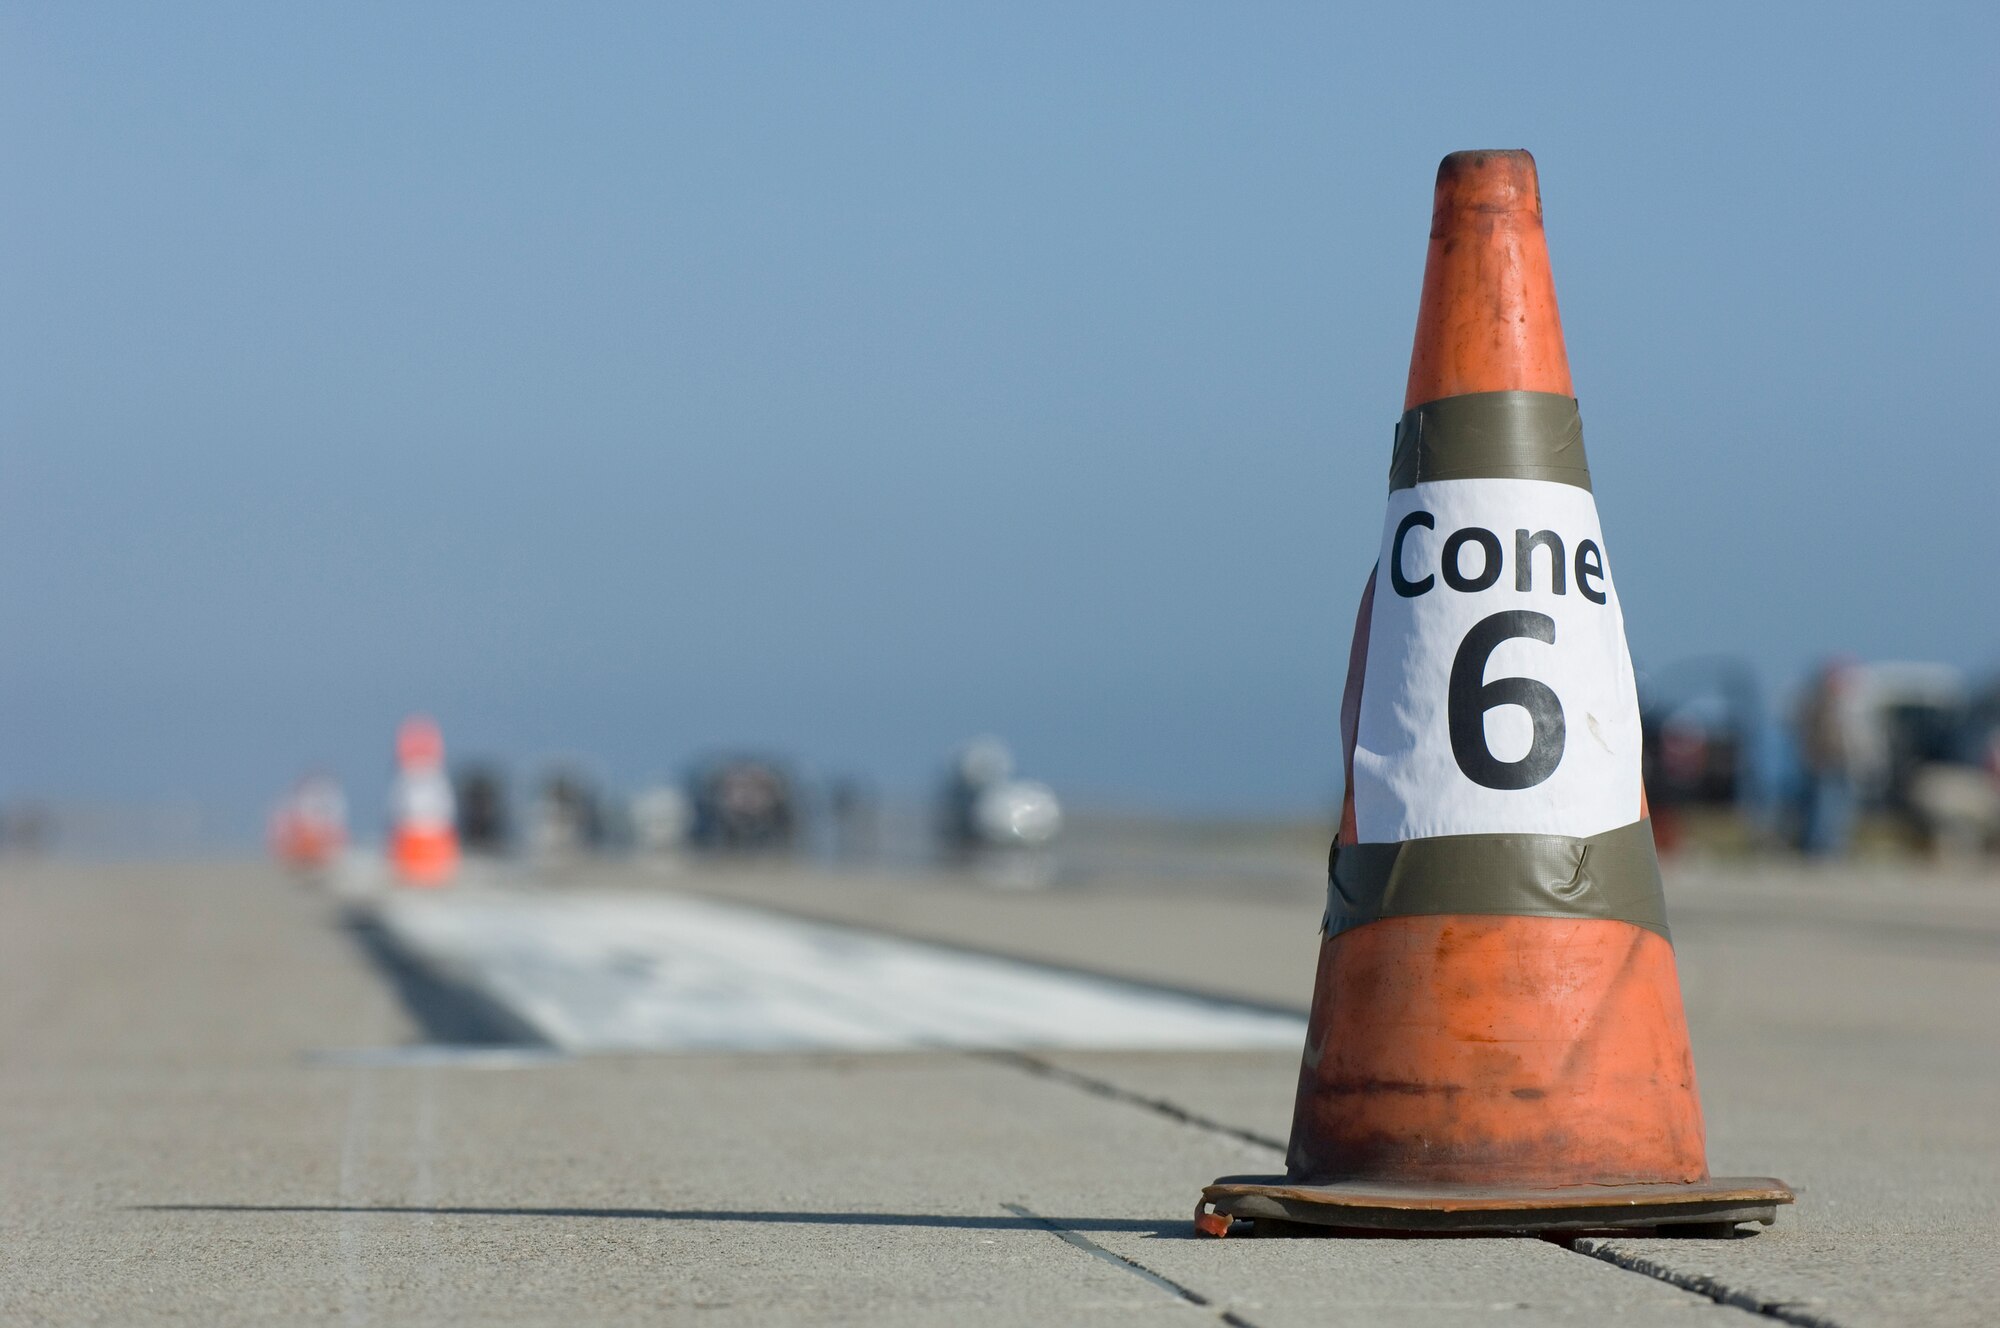 VANDENBERG AIR FORCE BASE, Calif. -- Construction crews set up numbered cones to help them coordinate where special equipment is needed to aid in the replacement of metal plates on the flightline here Saturday, May 8, 2010. Construction crews replaced the metal plates to ensure the X-37B has a safe landing. (U.S. Air Force photo by Staff Sgt. Levi Riendeau)